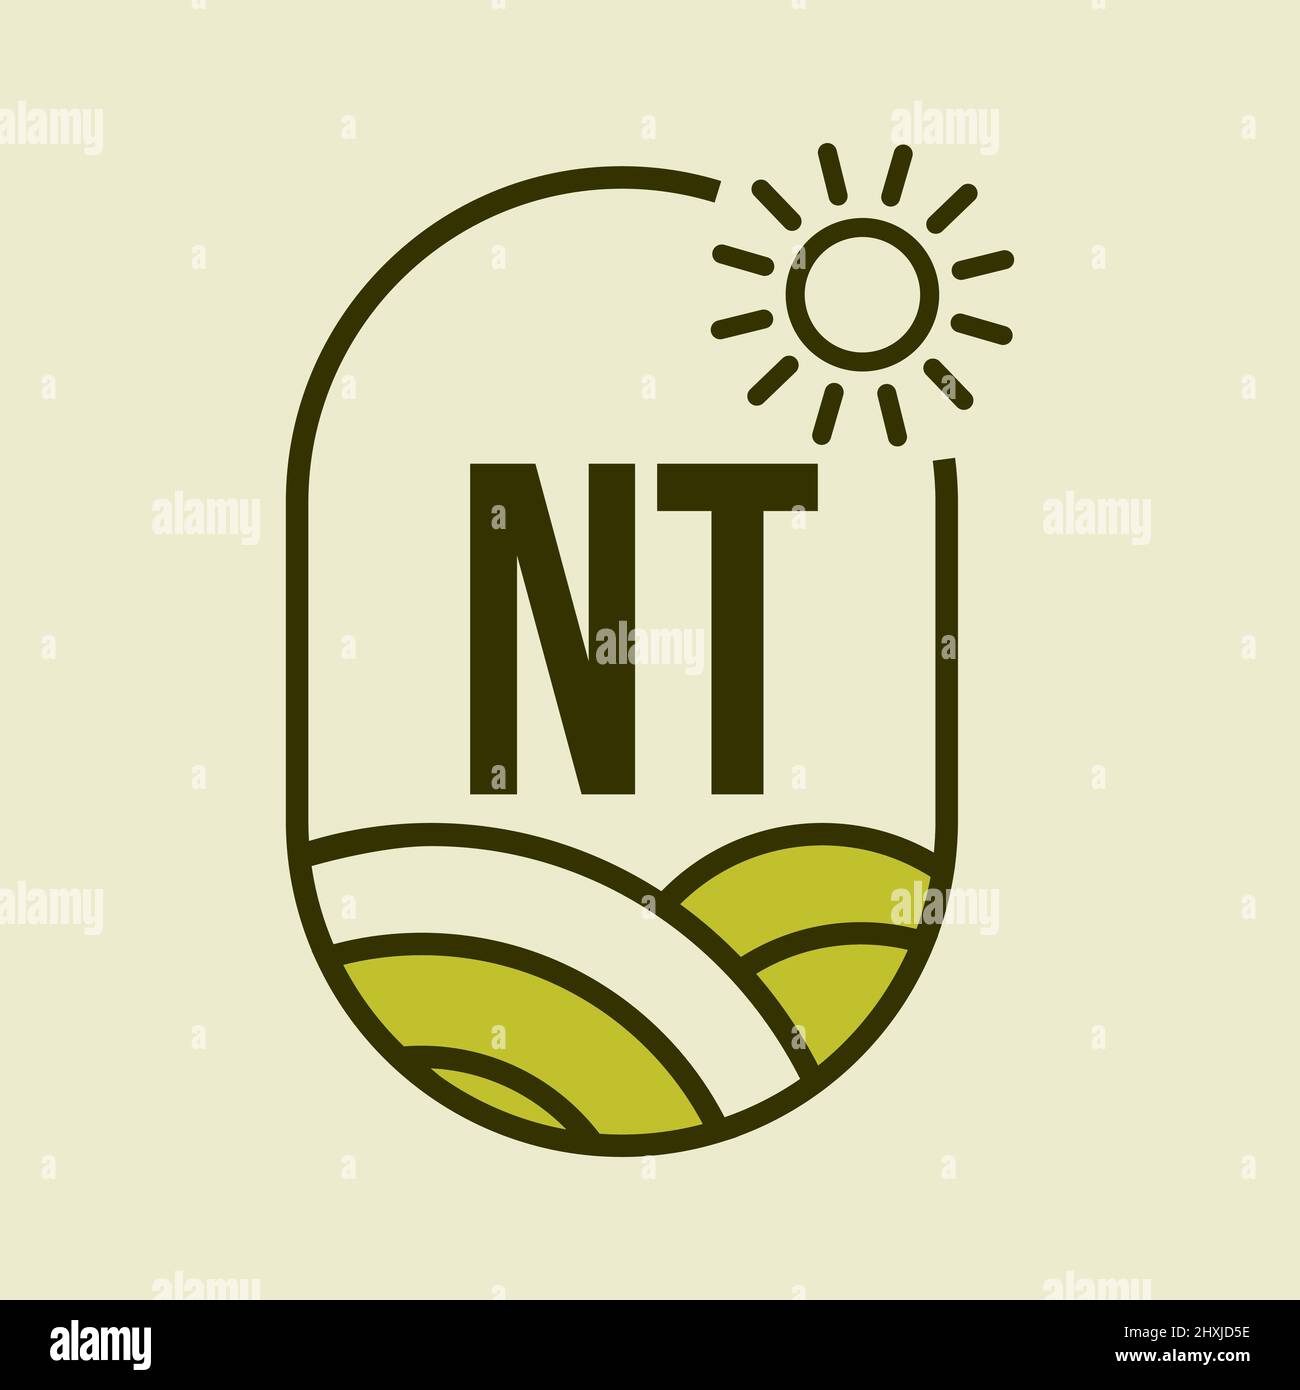 Agriculture Logo On Letter NT Emblem Template. Letter NT Agro Farm, Agribusiness, Eco-farm Sign Stock Vector